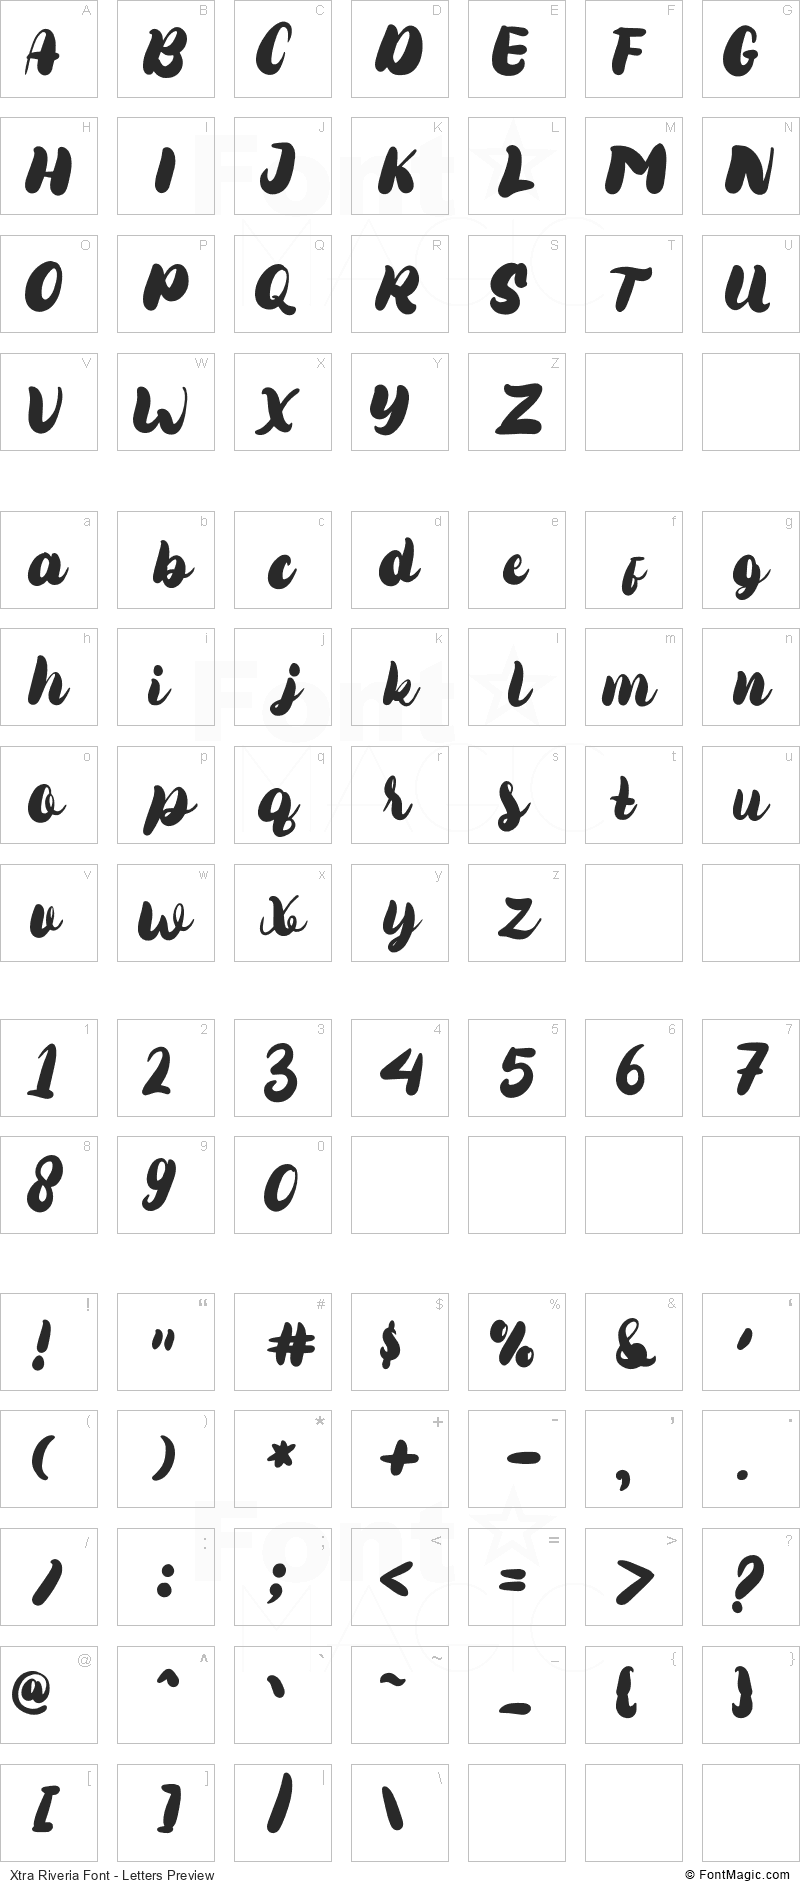 Xtra Riveria Font - All Latters Preview Chart